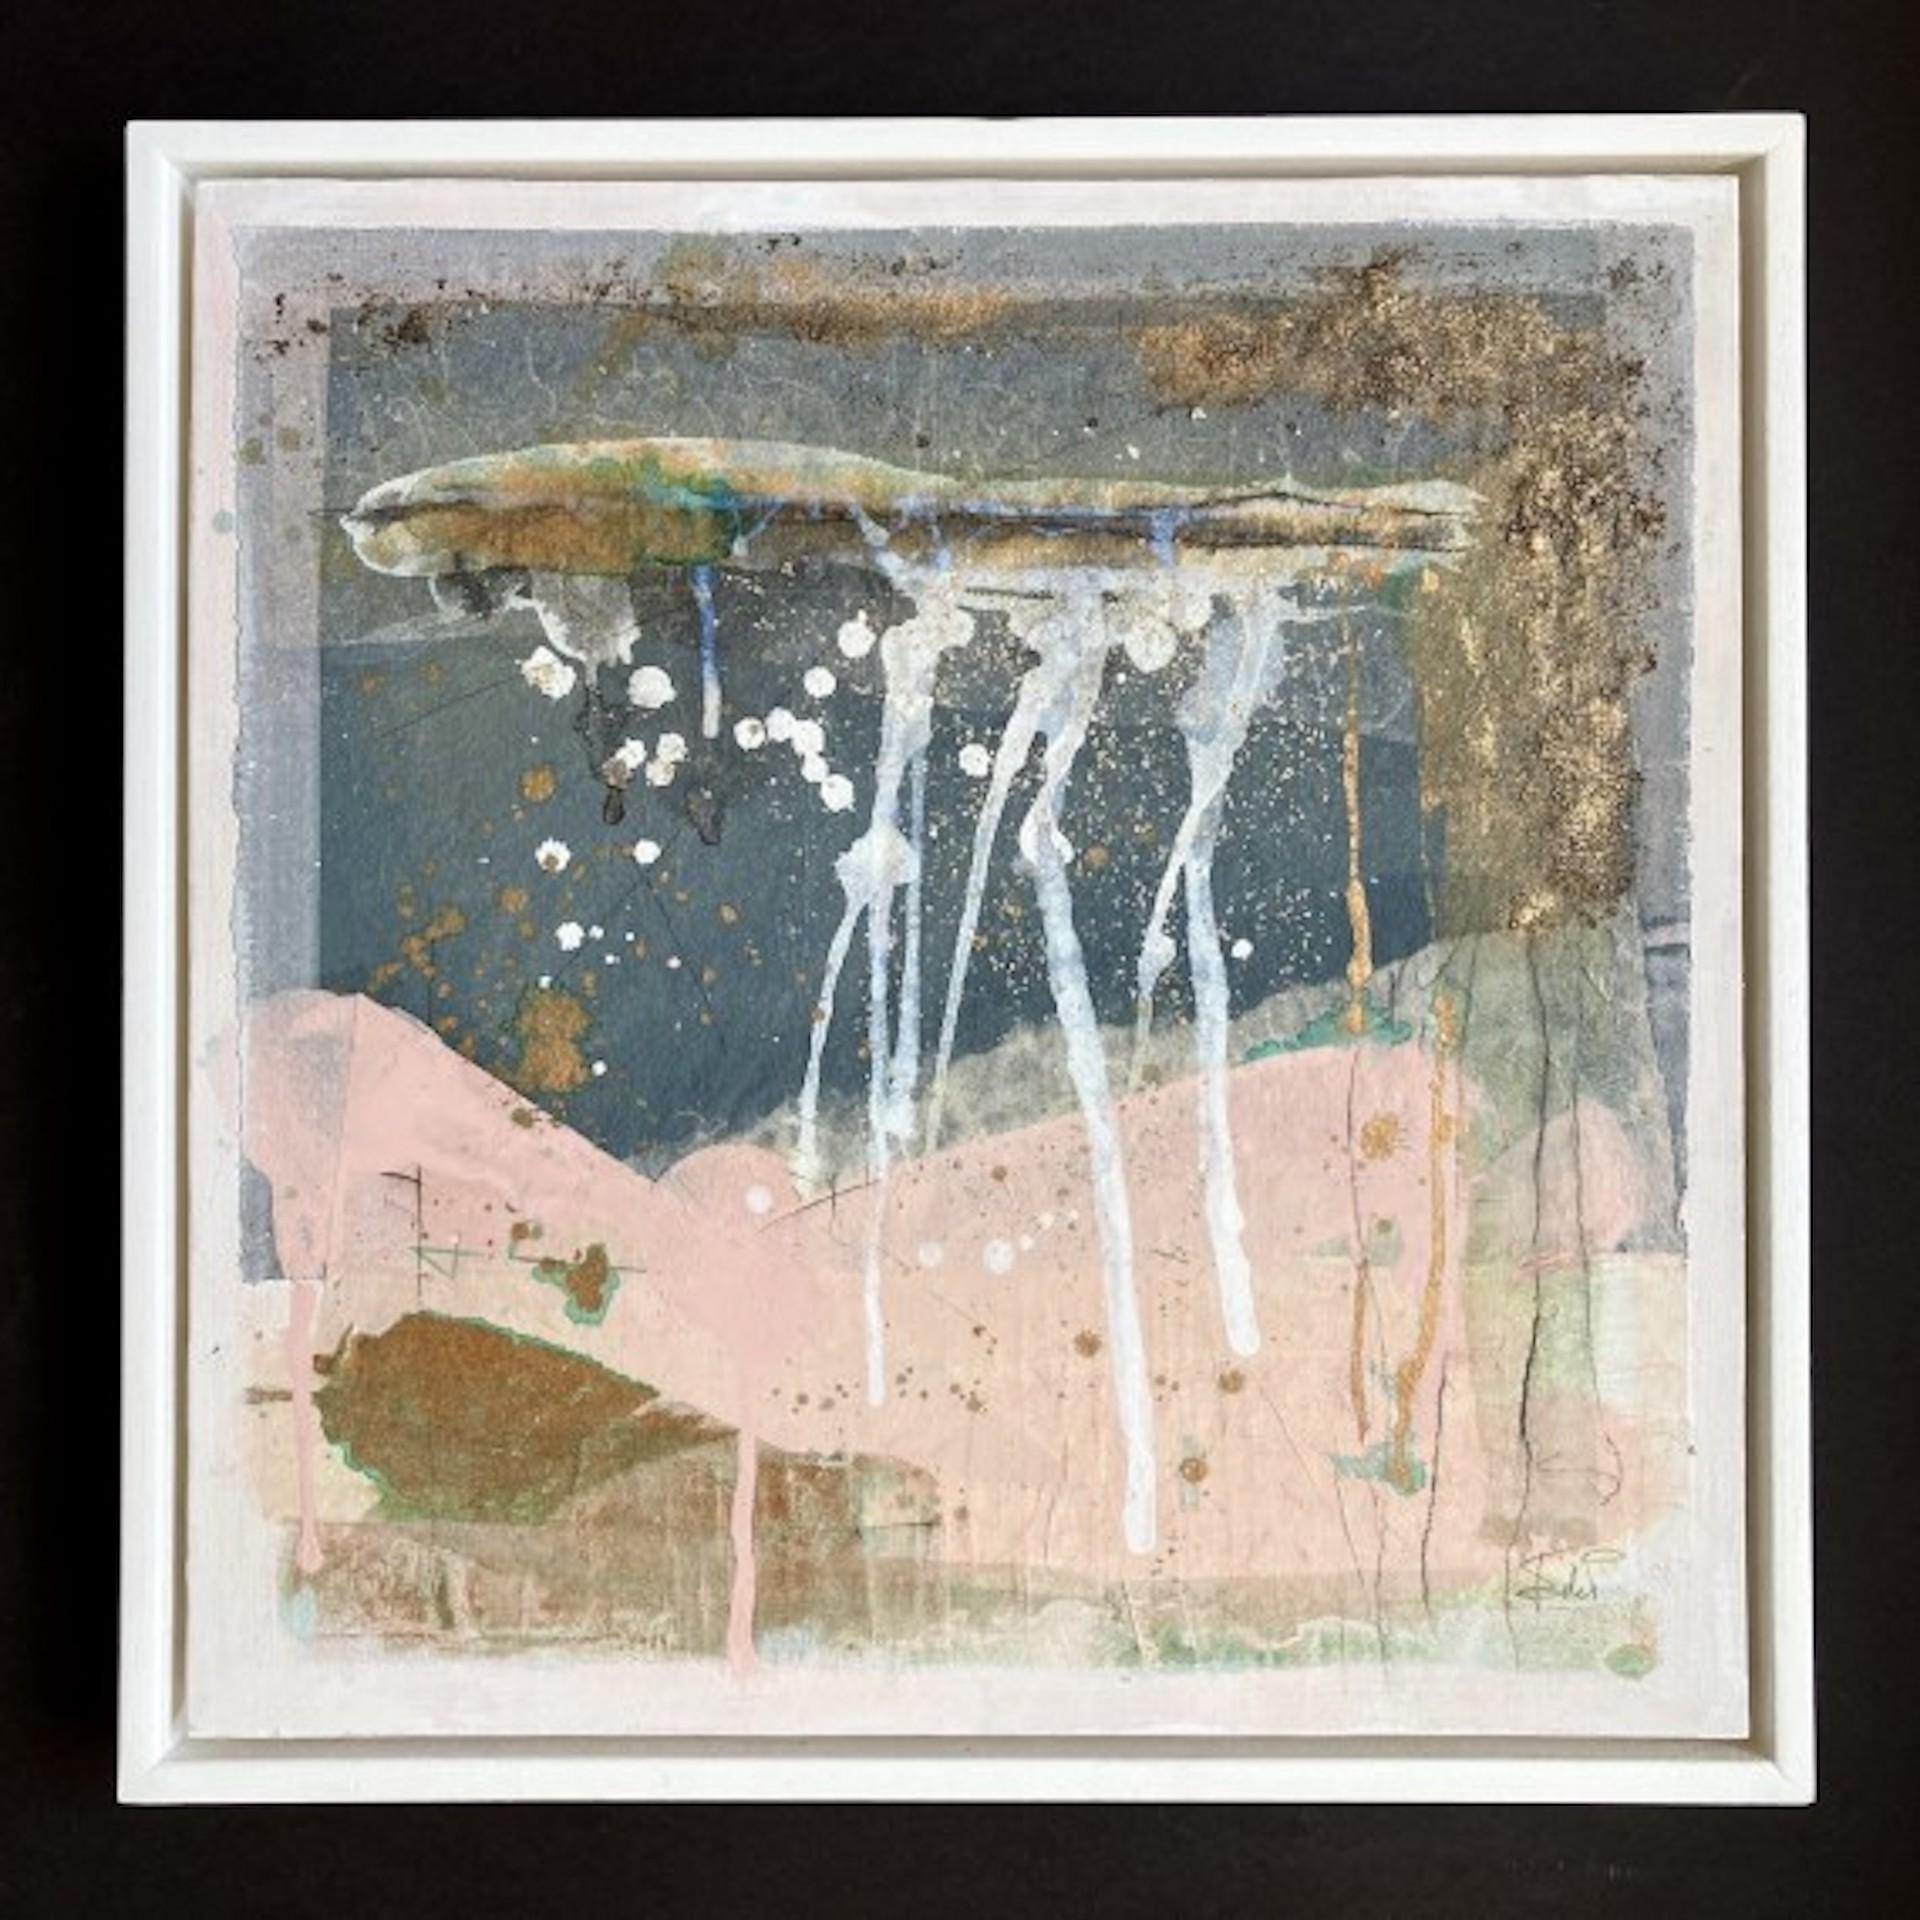 A Sense of Sea iv [2021]
Original
Abstract
Mixed media including collage, Chinese ink and gilding wax on artists board
Image size: H:41 cm x W:41 cm
Framed Size: H:43 cm x W:43 cm x D:3.5cm
Sold Framed
Please note that insitu images are purely an